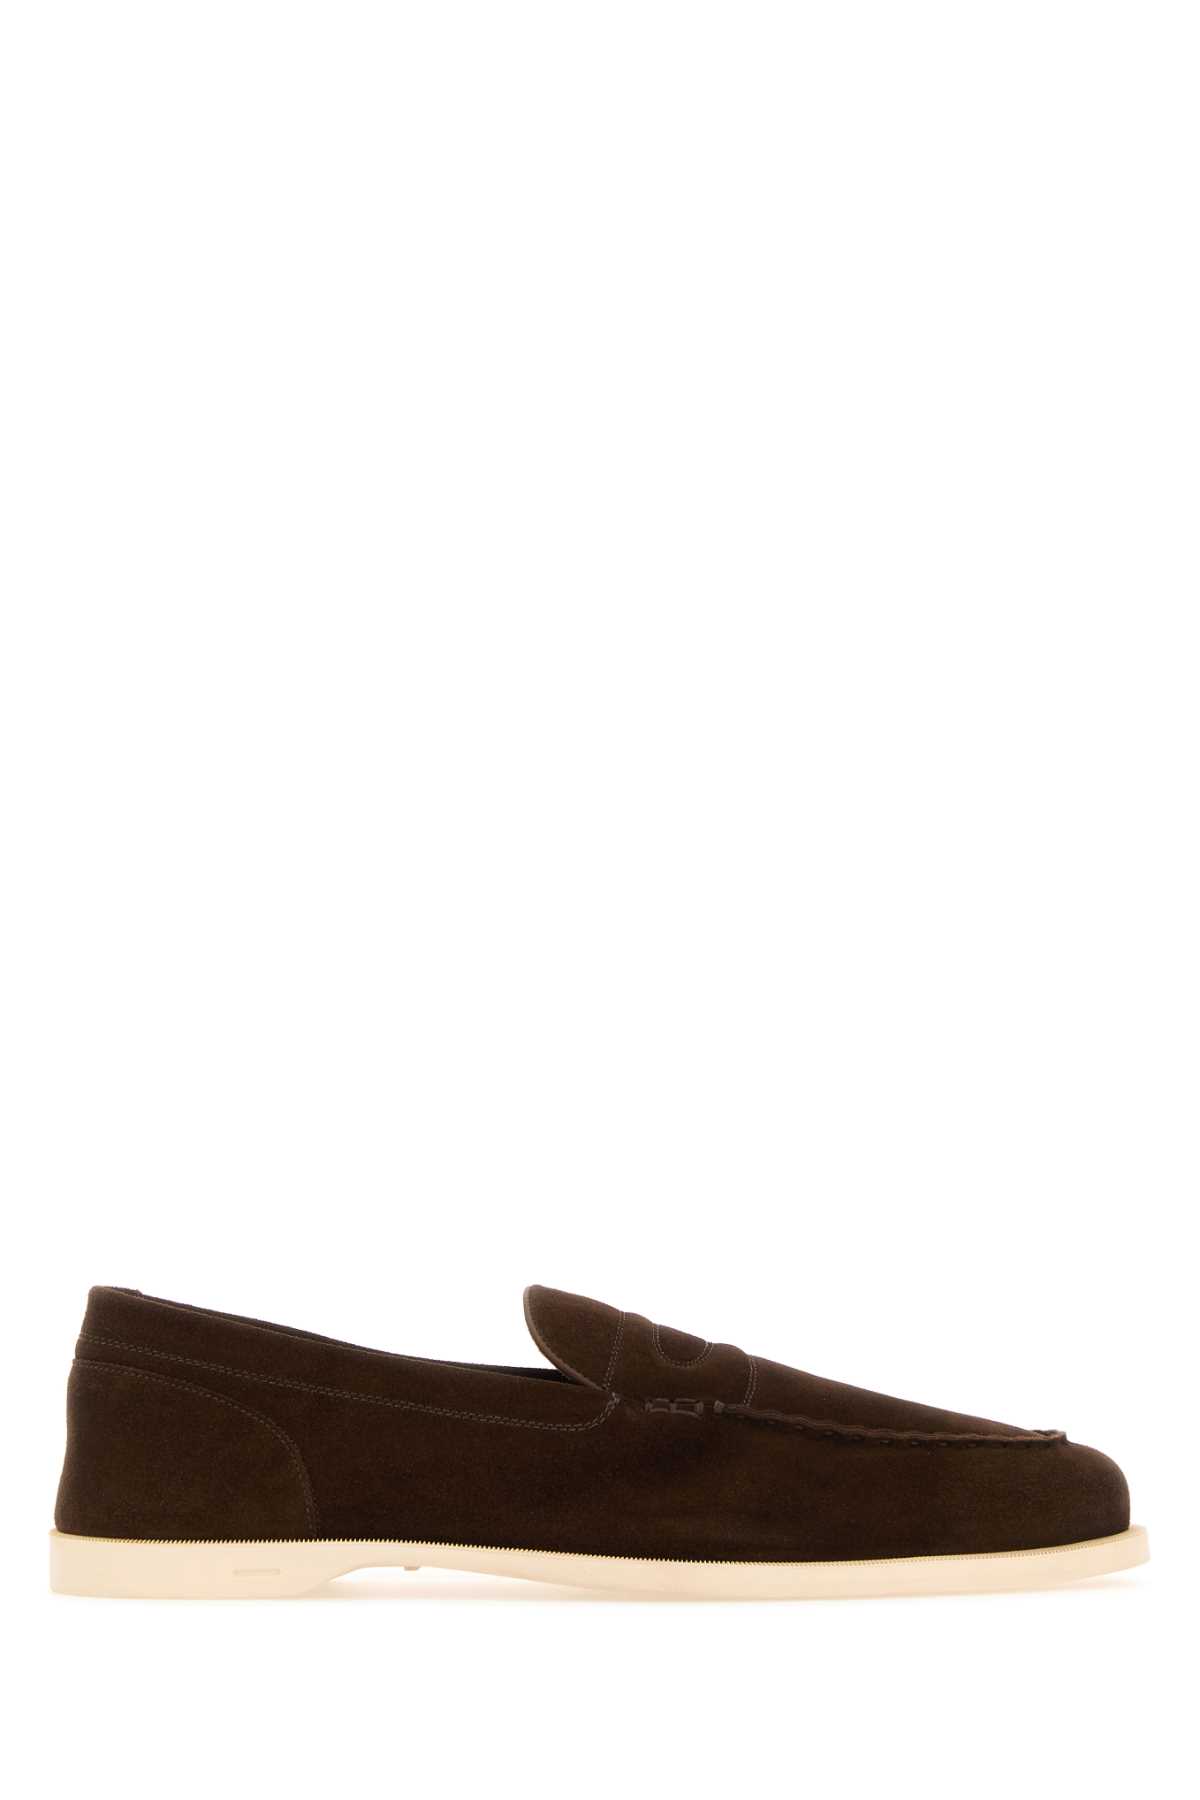 JOHN LOBB CHOCOLATE SUEDE PACE LOAFERS